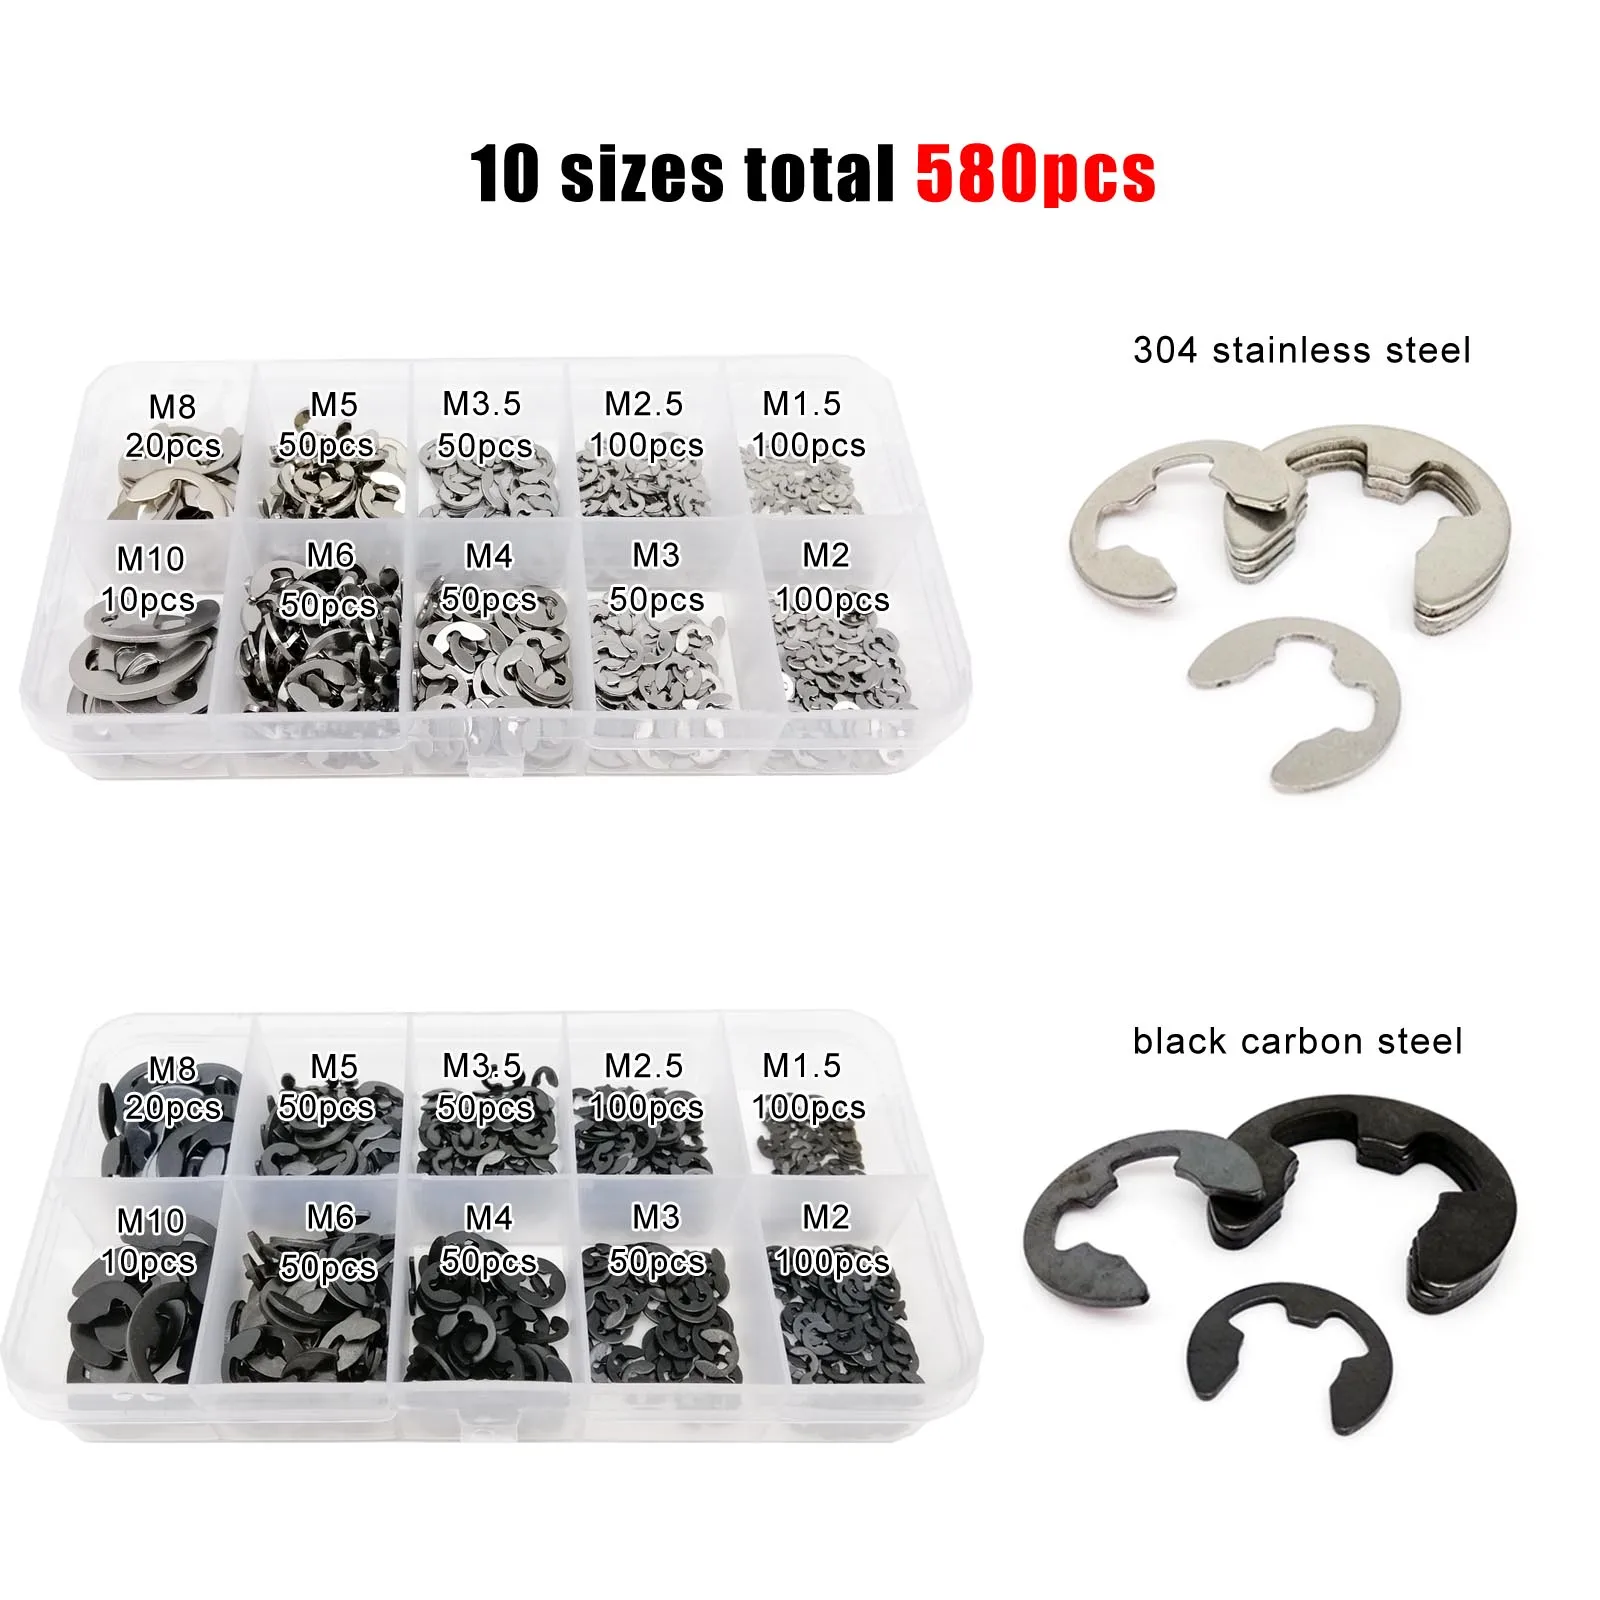 580Pc Stainless Steel Washer/Flat Washer Assortment Set For M2.5 3 4 5 6 8 10 12 